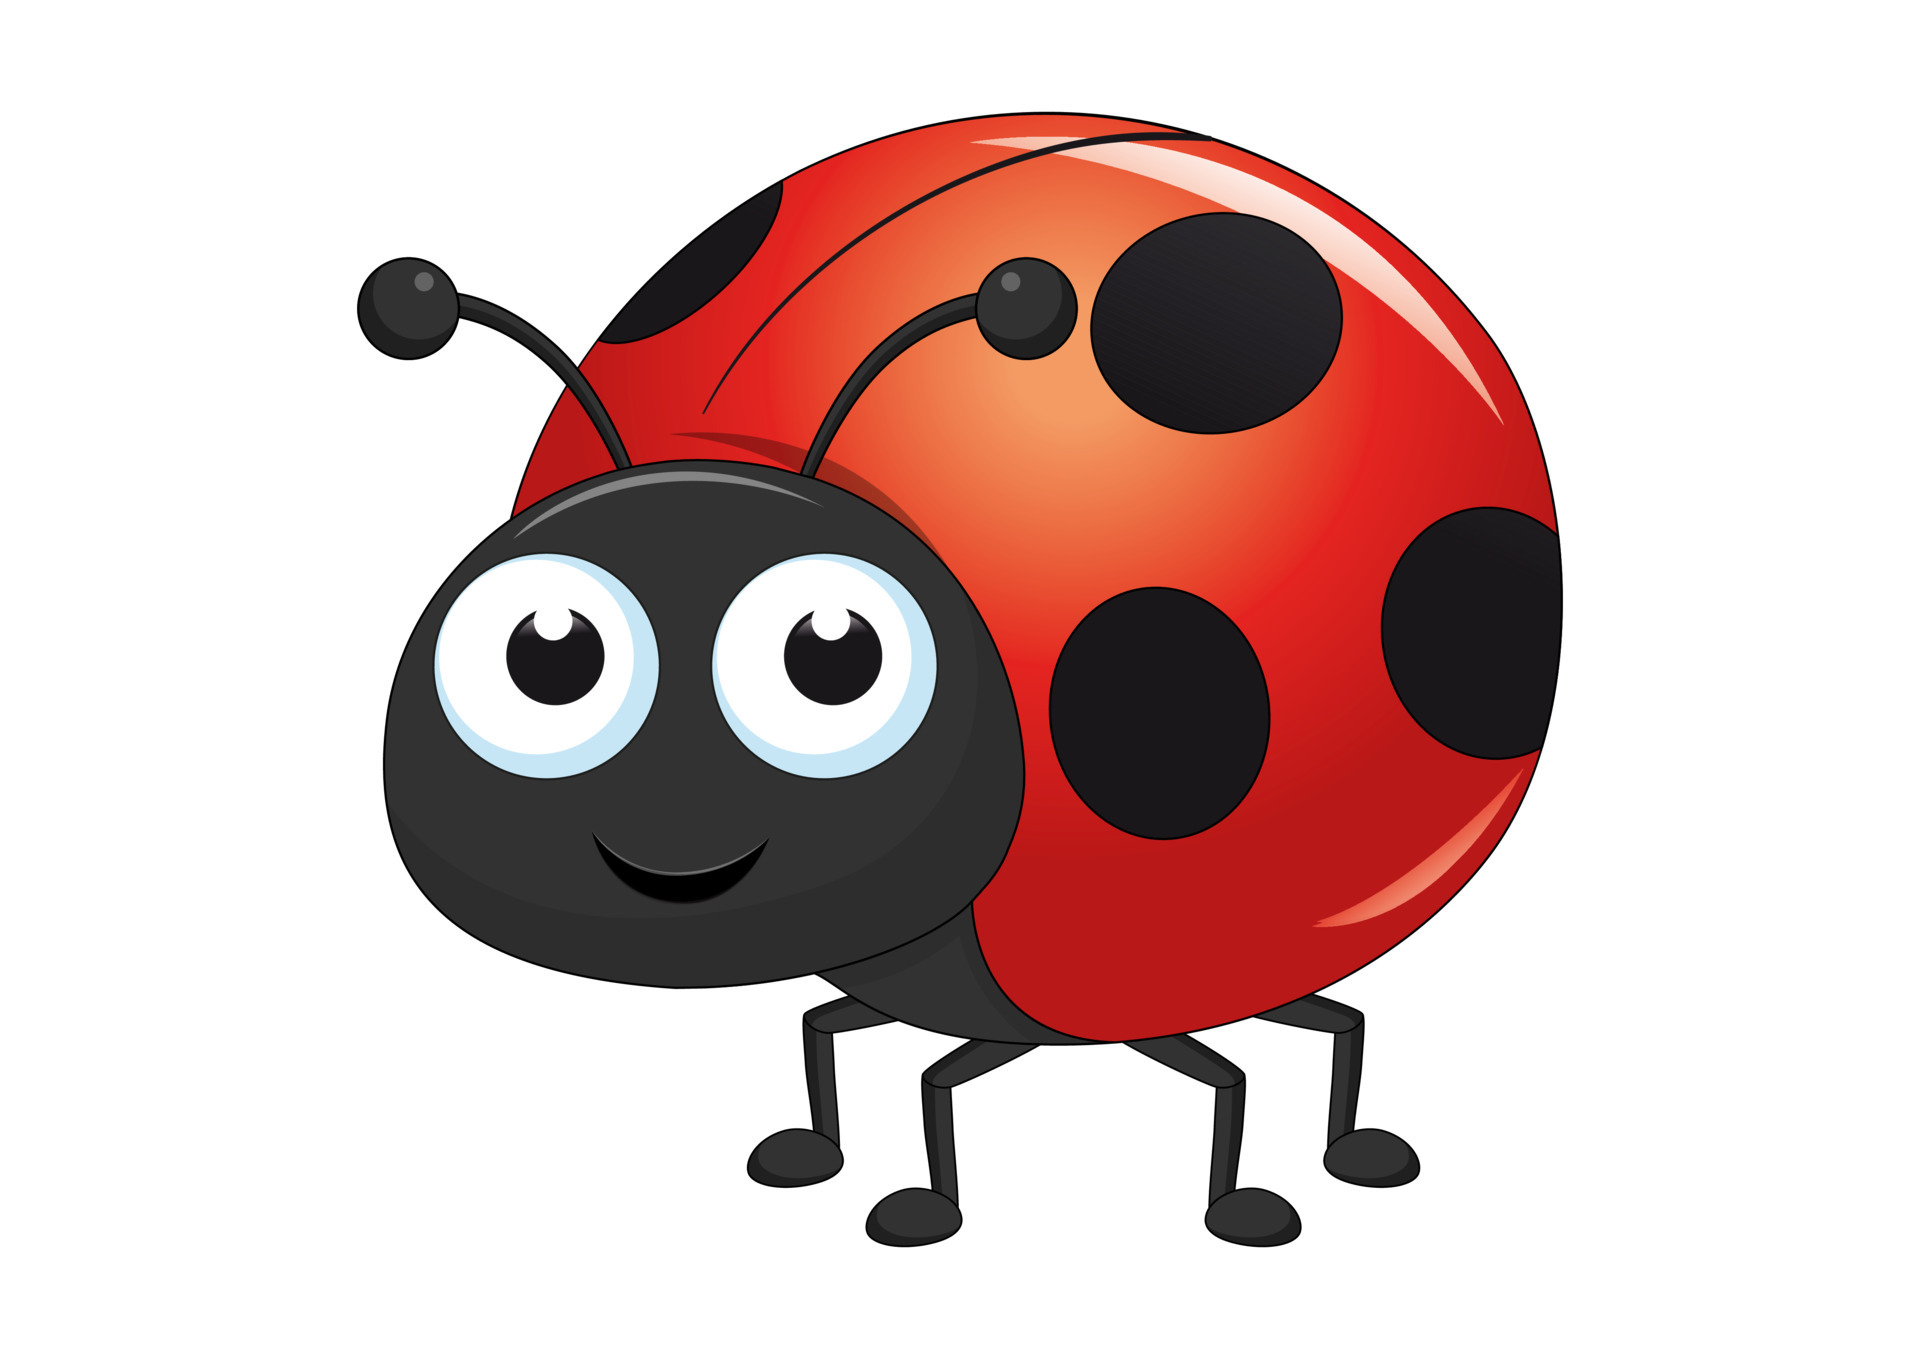 Ladybug Cartoon Vector Art, Icons, and Graphics for Free Download